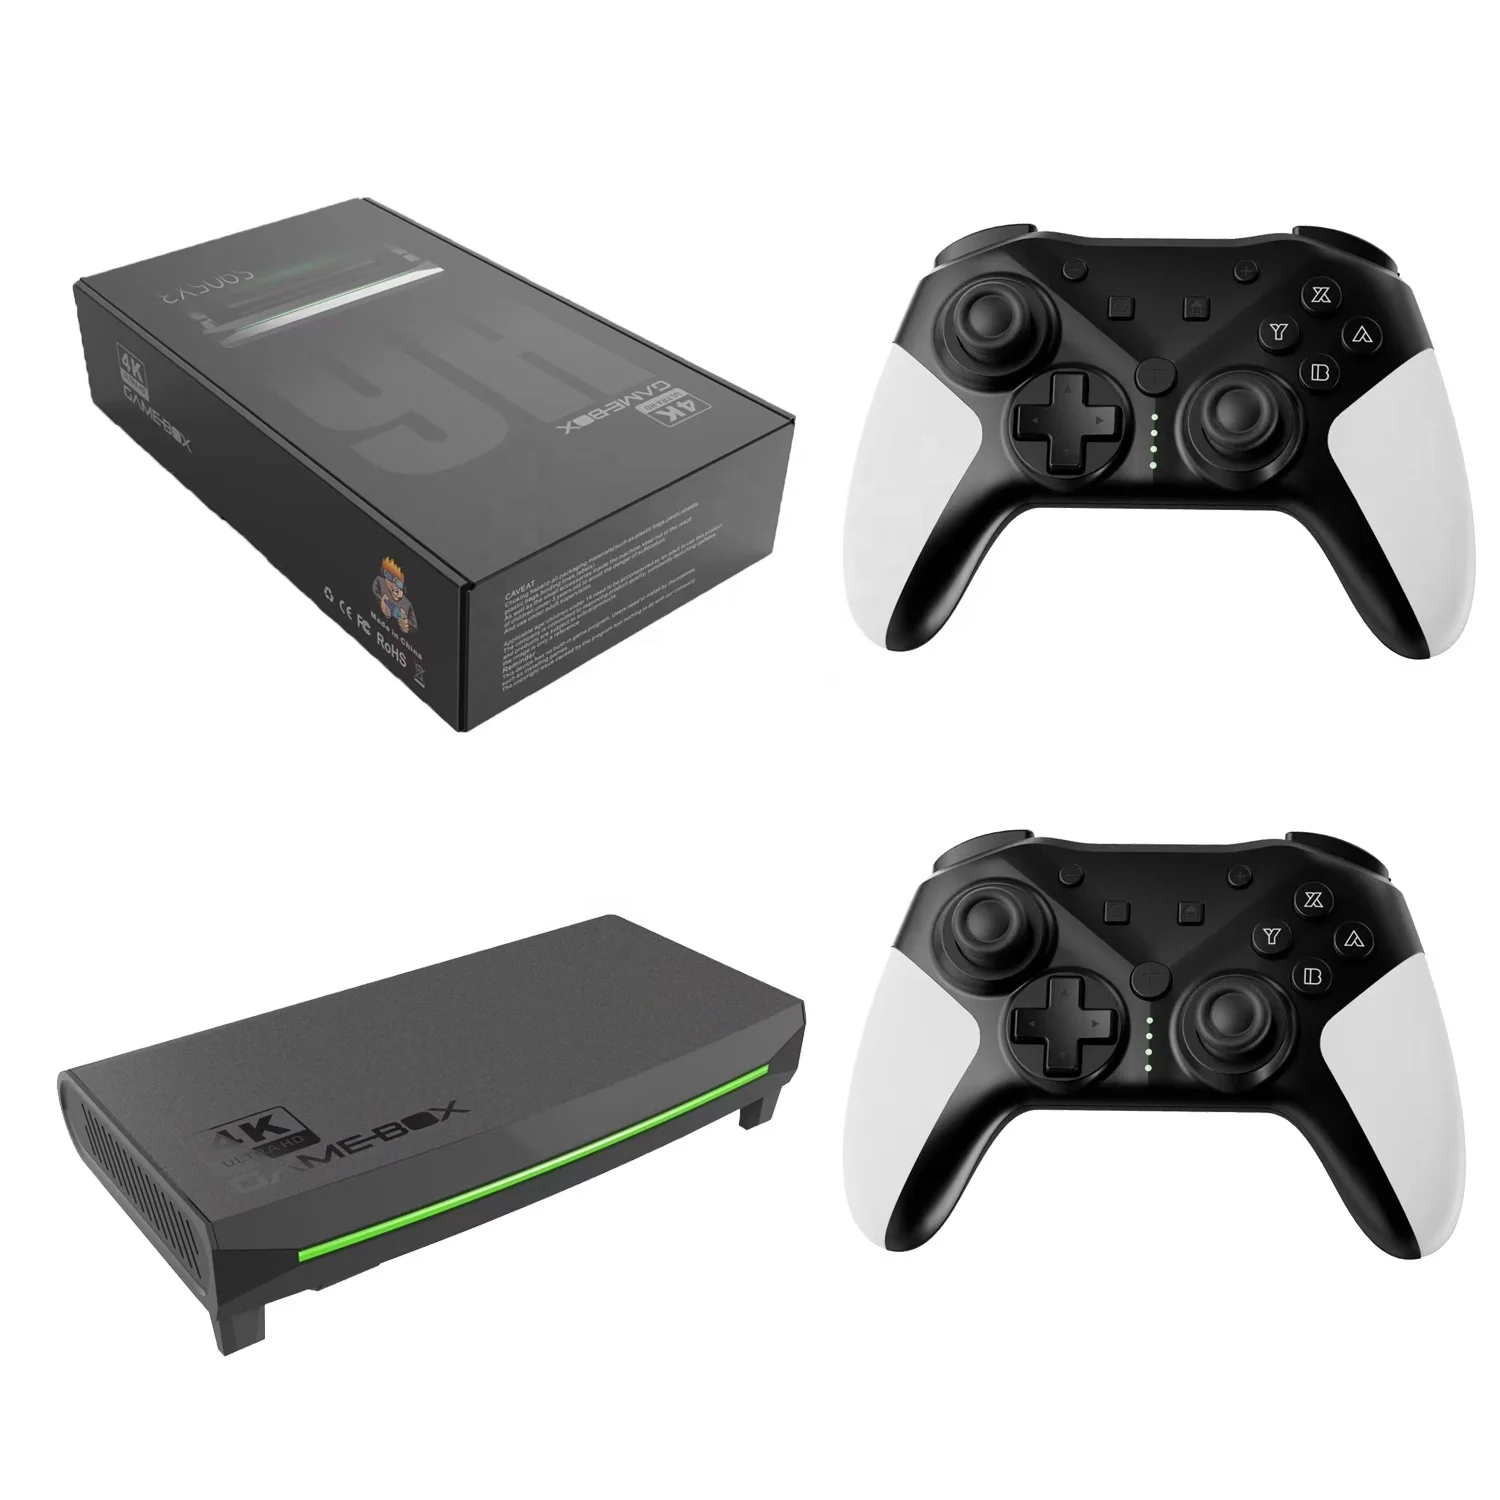 

4K HD H6 Game Box TV Output Video Game Console Wired Controller DDRIII 256M With 10000 Games 64bit A55 Architecture Chip